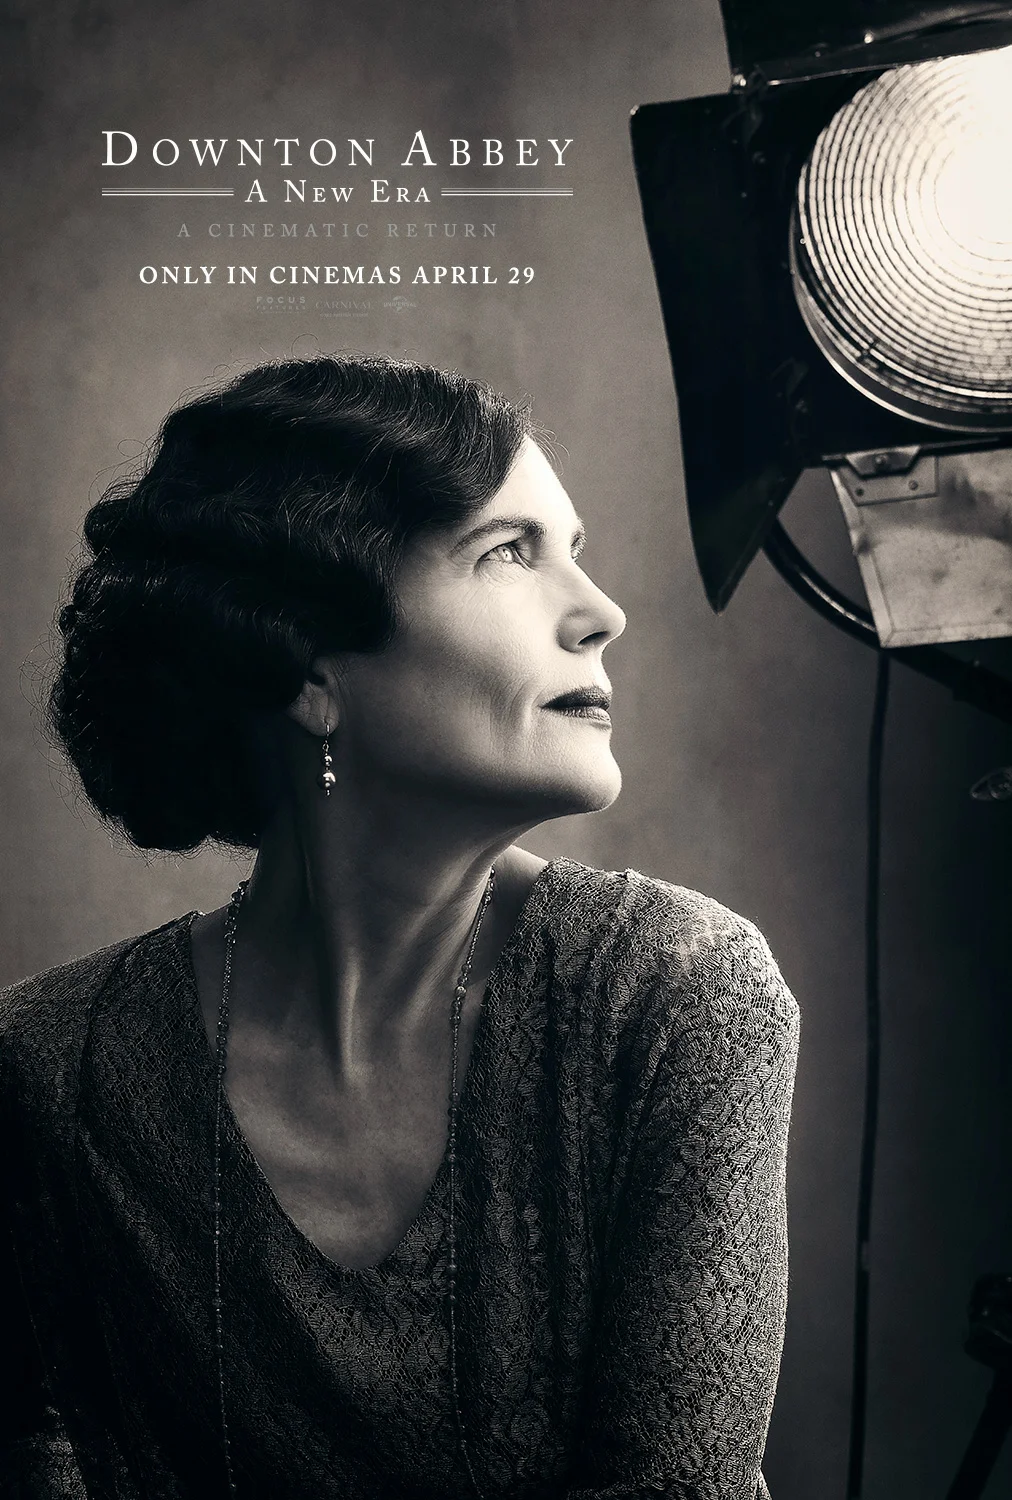 downton-abbey-a-new-era-released-character-posters-multiple-main-actors-appear-4